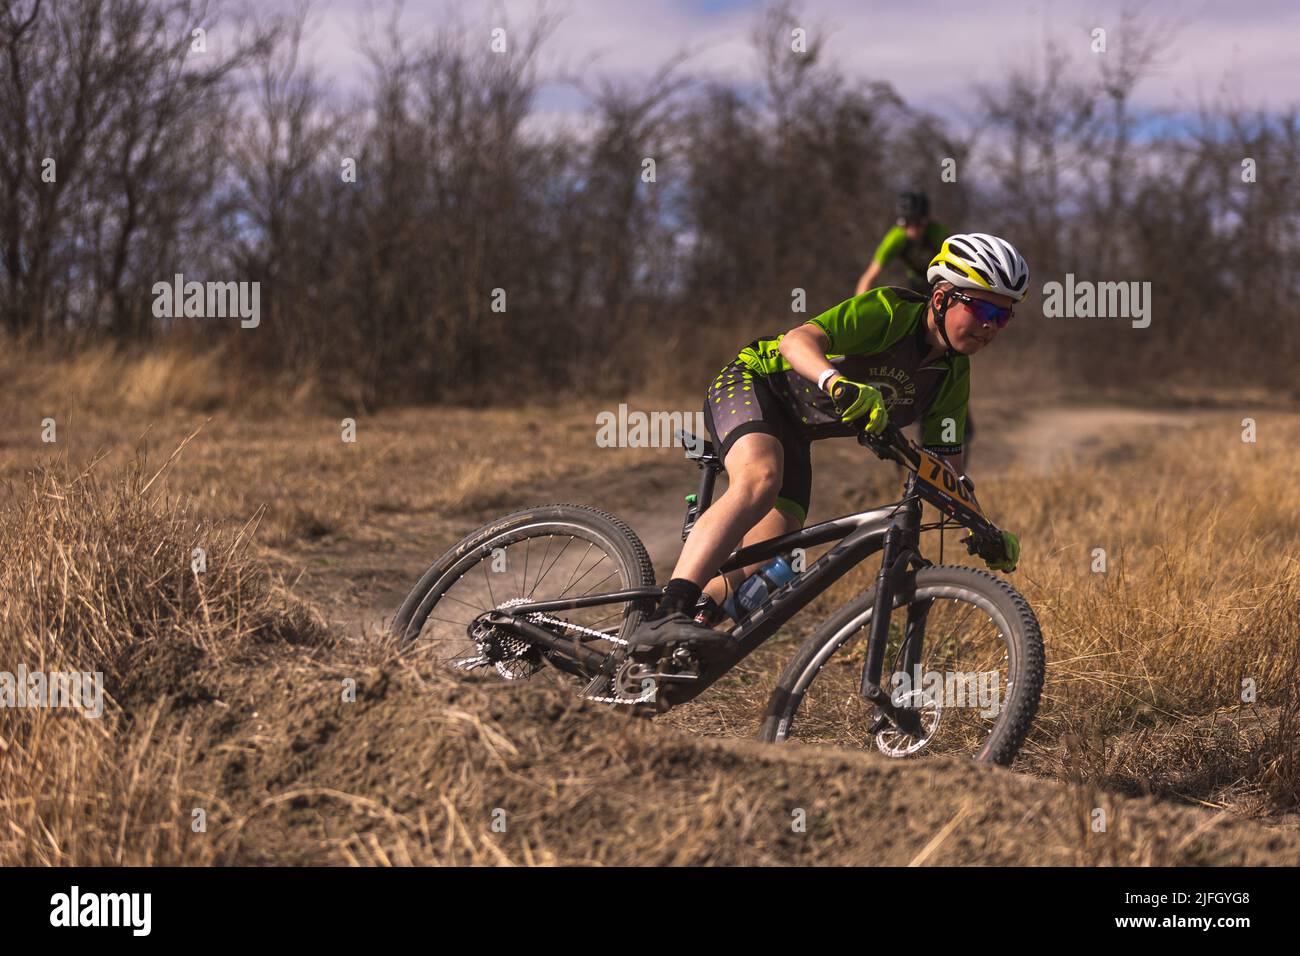 A Caucasian boy riding a bike in a race held in the DFW metroplex in Texas Stock Photo